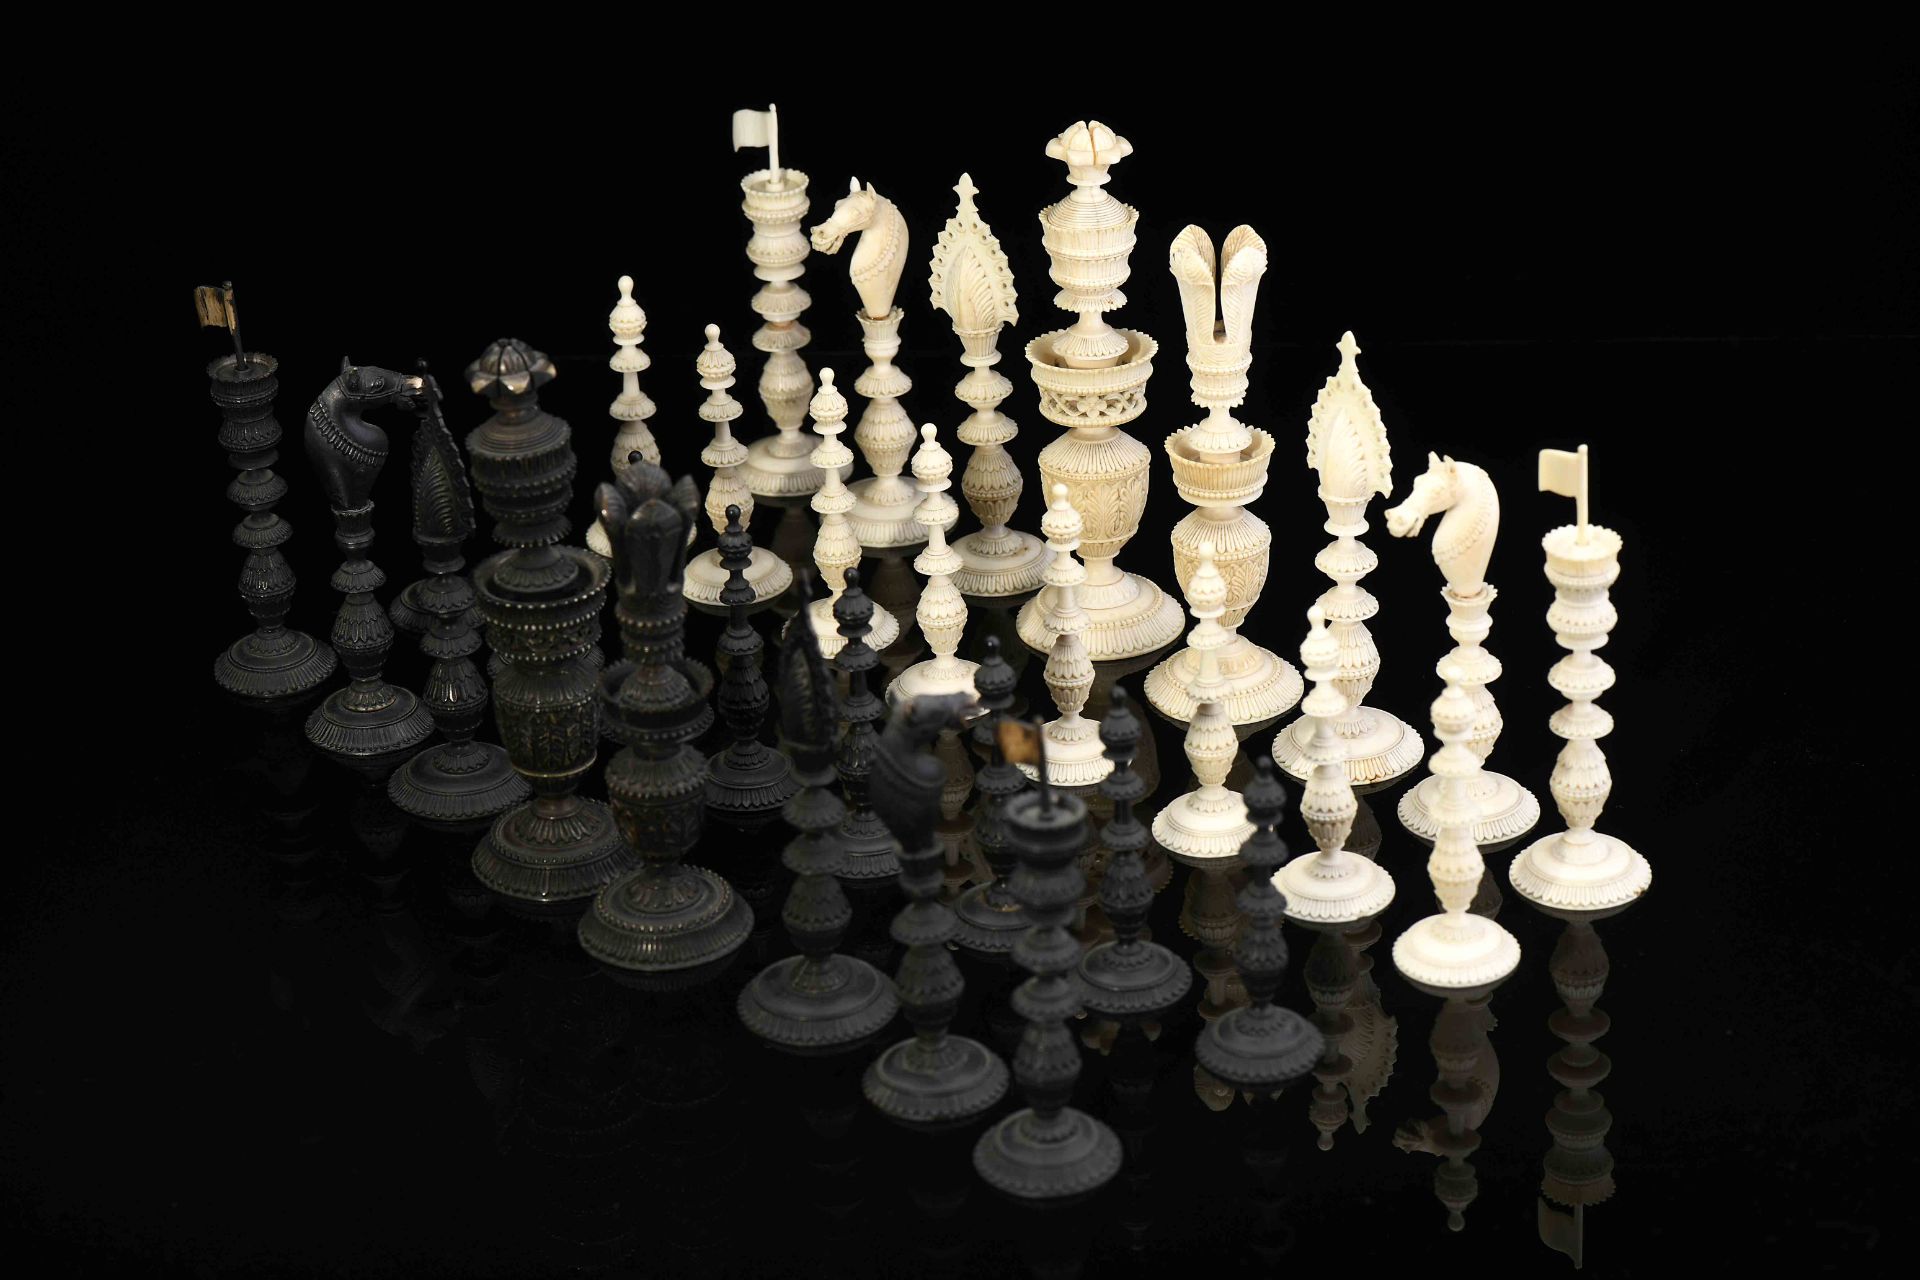 Chess pieces - "Kashmir" style